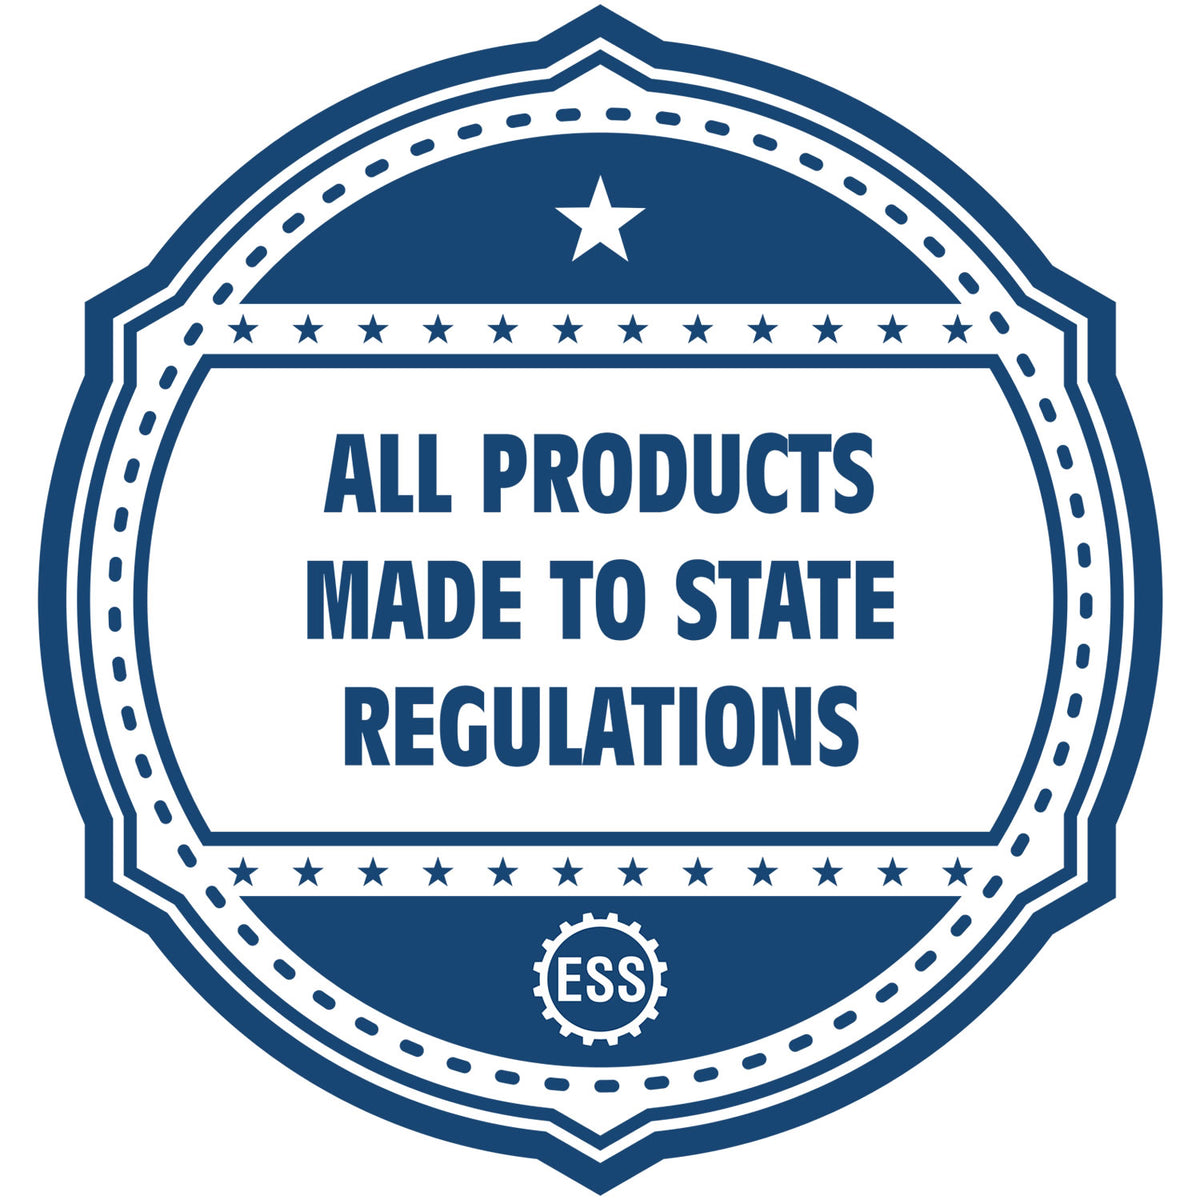 A blue icon or badge for the Slim Pre-Inked Illinois Professional Geologist Seal Stamp showing that this product is made in compliance with state regulations.